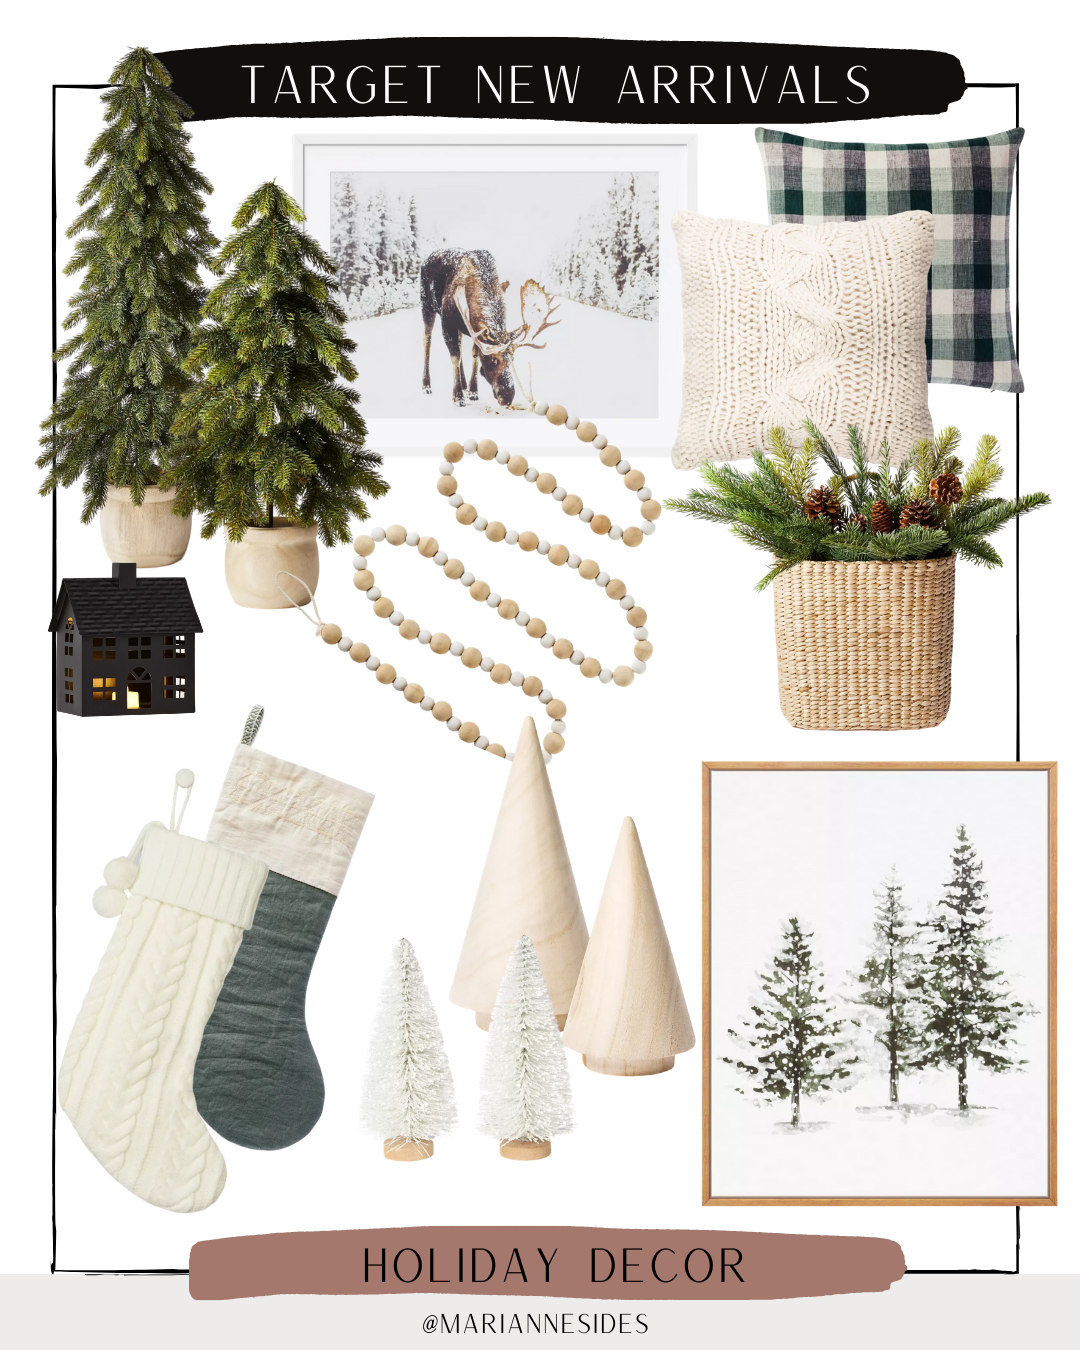 Target Holiday Decor Finds - The M.A. Times by Marianne